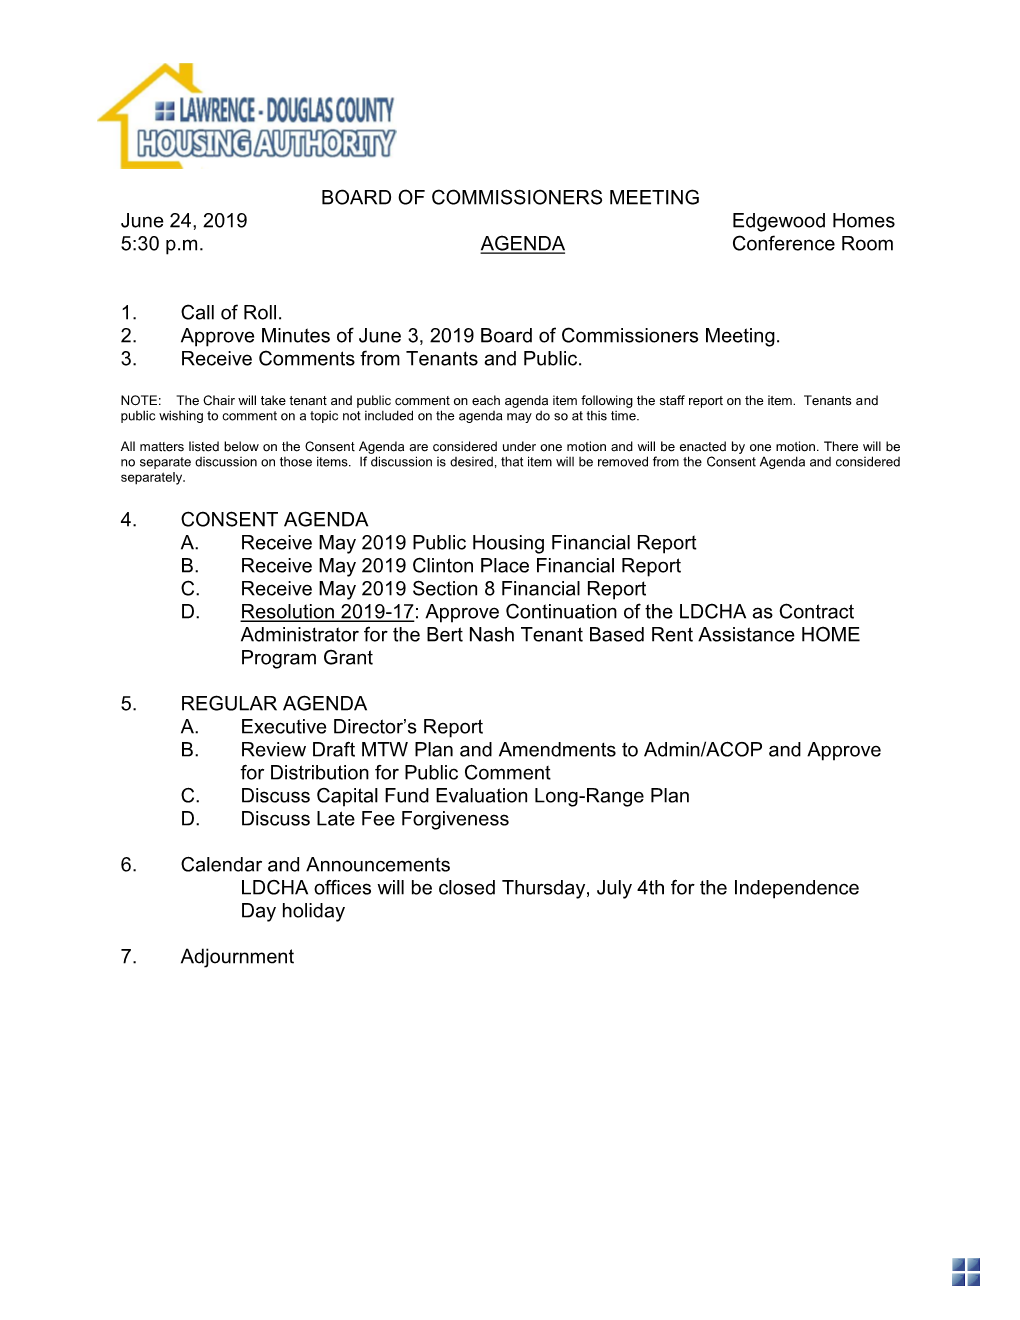 BOARD of COMMISSIONERS MEETING June 24, 2019 Edgewood Homes 5:30 P.M